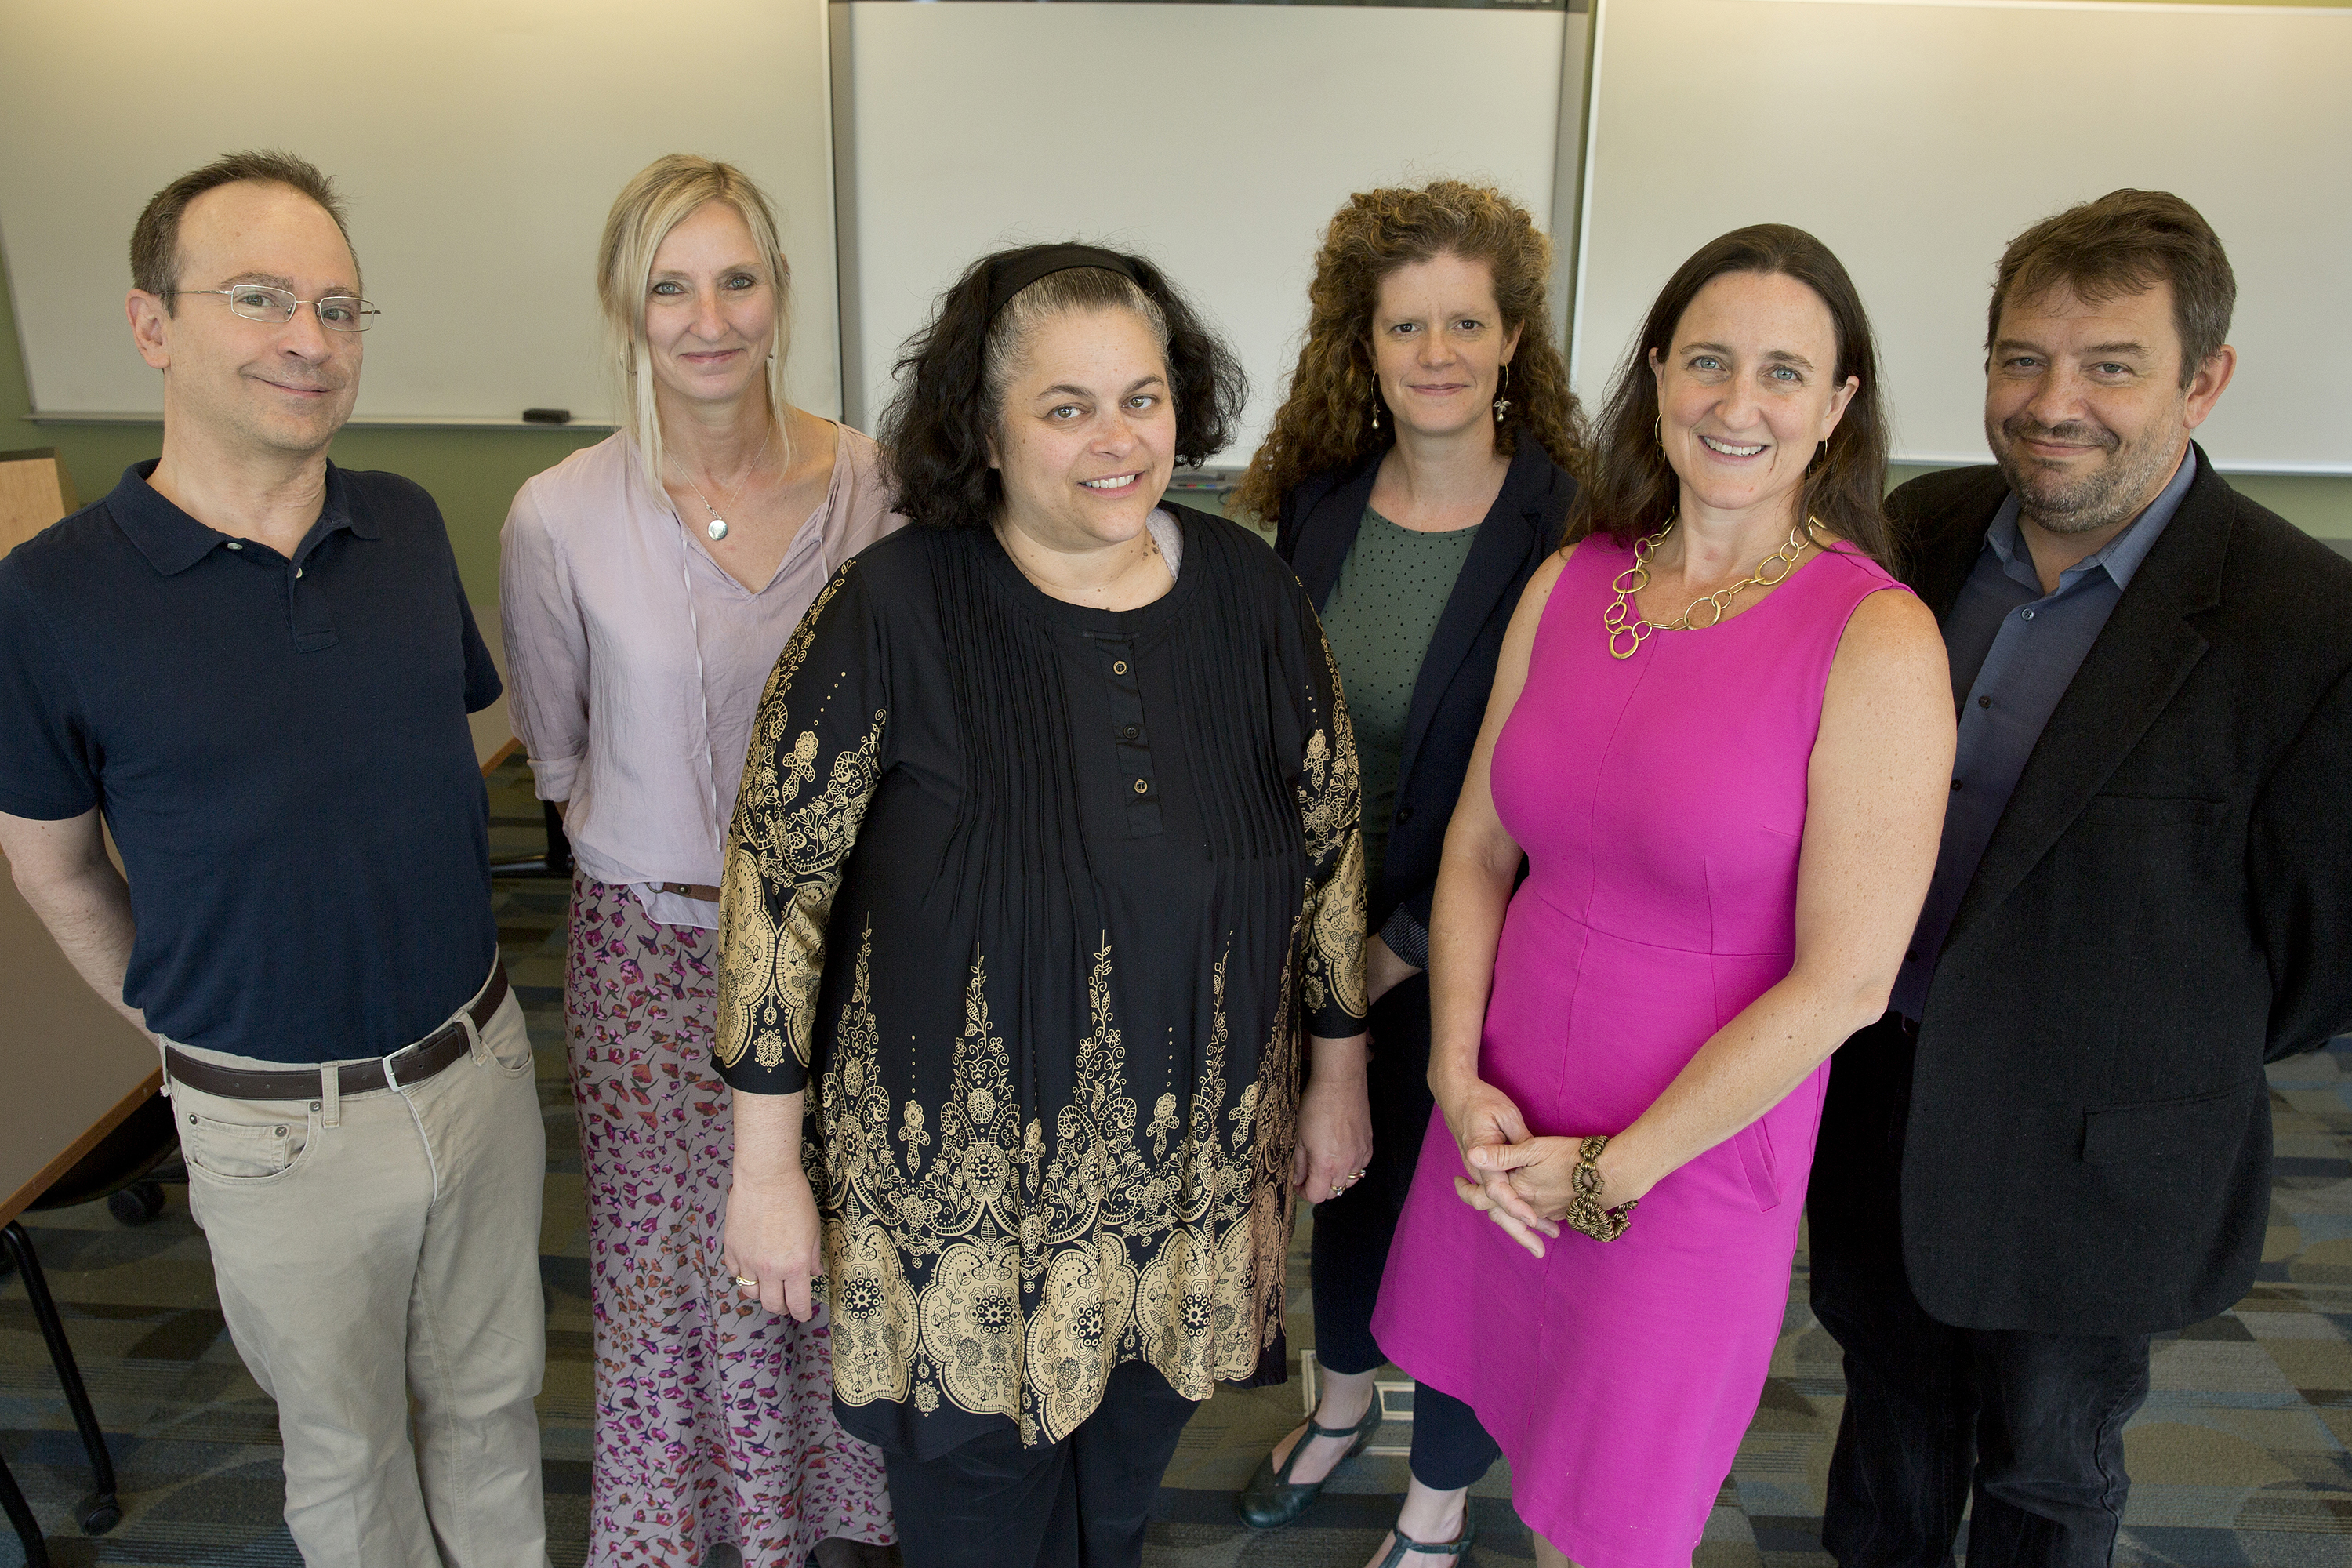 From left, professor of linguistics William Snyder; professor of psychological sciences R. Holly Fitch; professor of educational psychology Betsy McCoach; associate professor of speech, language, and hearing sciences Emily Myers; associate professor of psychological sciences Inge-Marie Eigsti; and professor of psychological sciences James Magnuson. (Bri Diaz/UConn Photo)